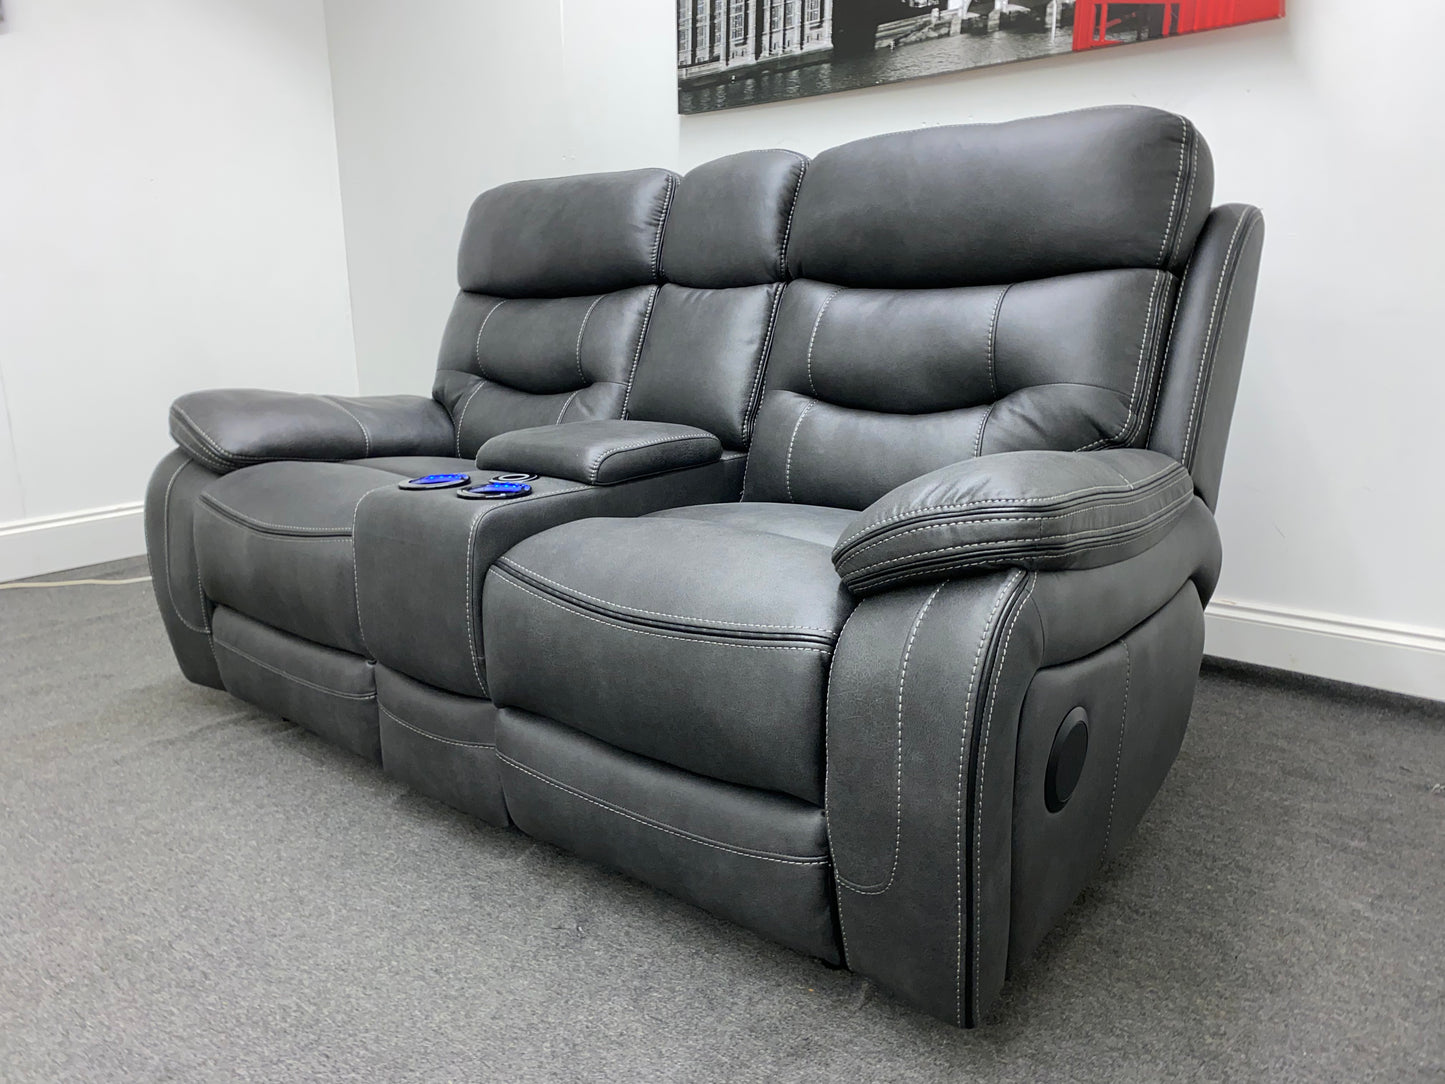 Vinson Express Smart 2 Seater Sofa With Console